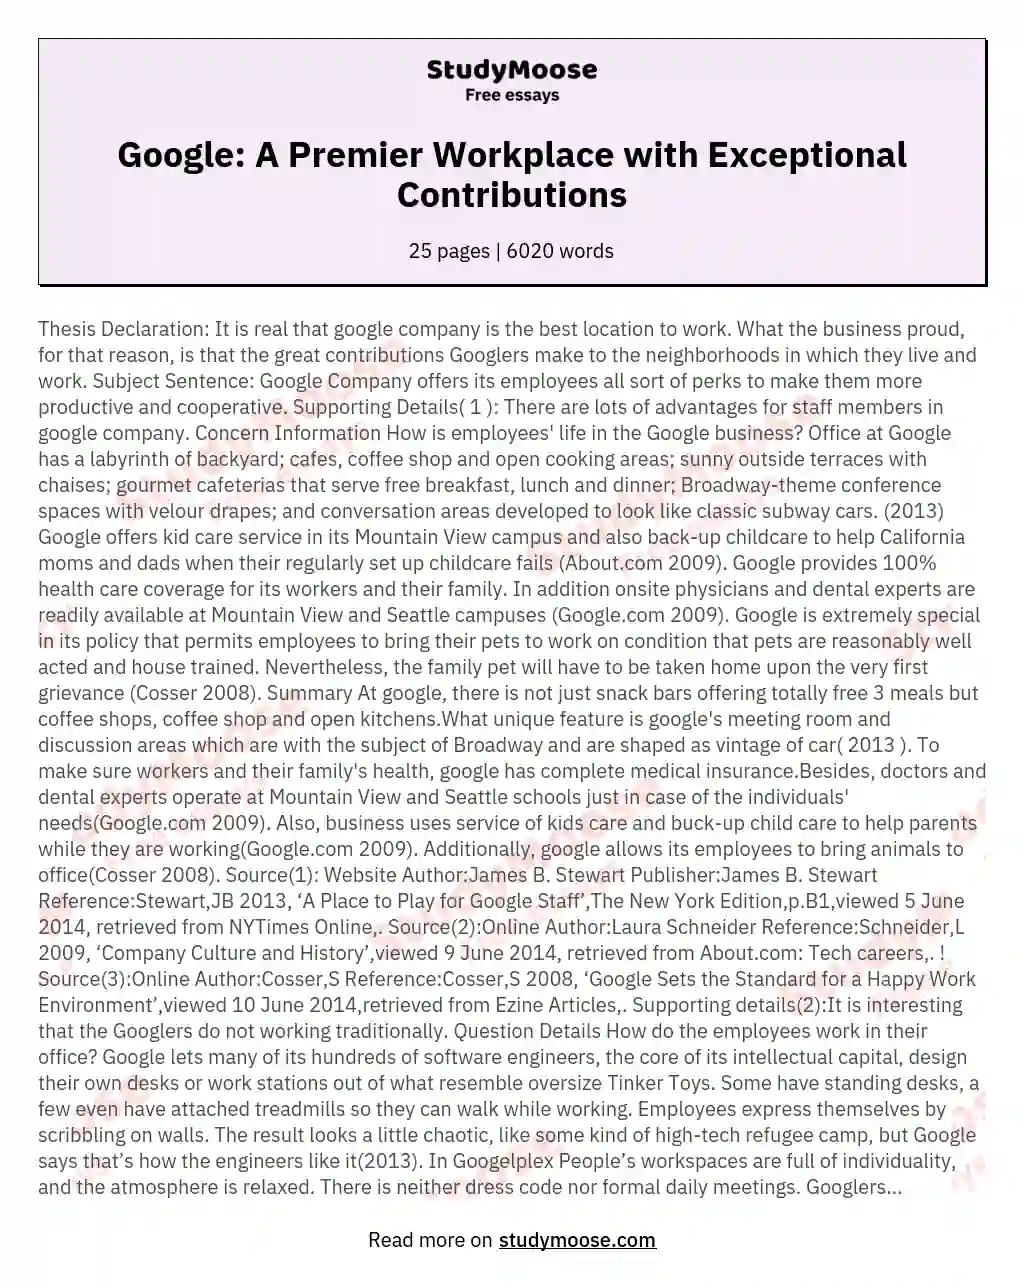 Google: A Premier Workplace with Exceptional Contributions